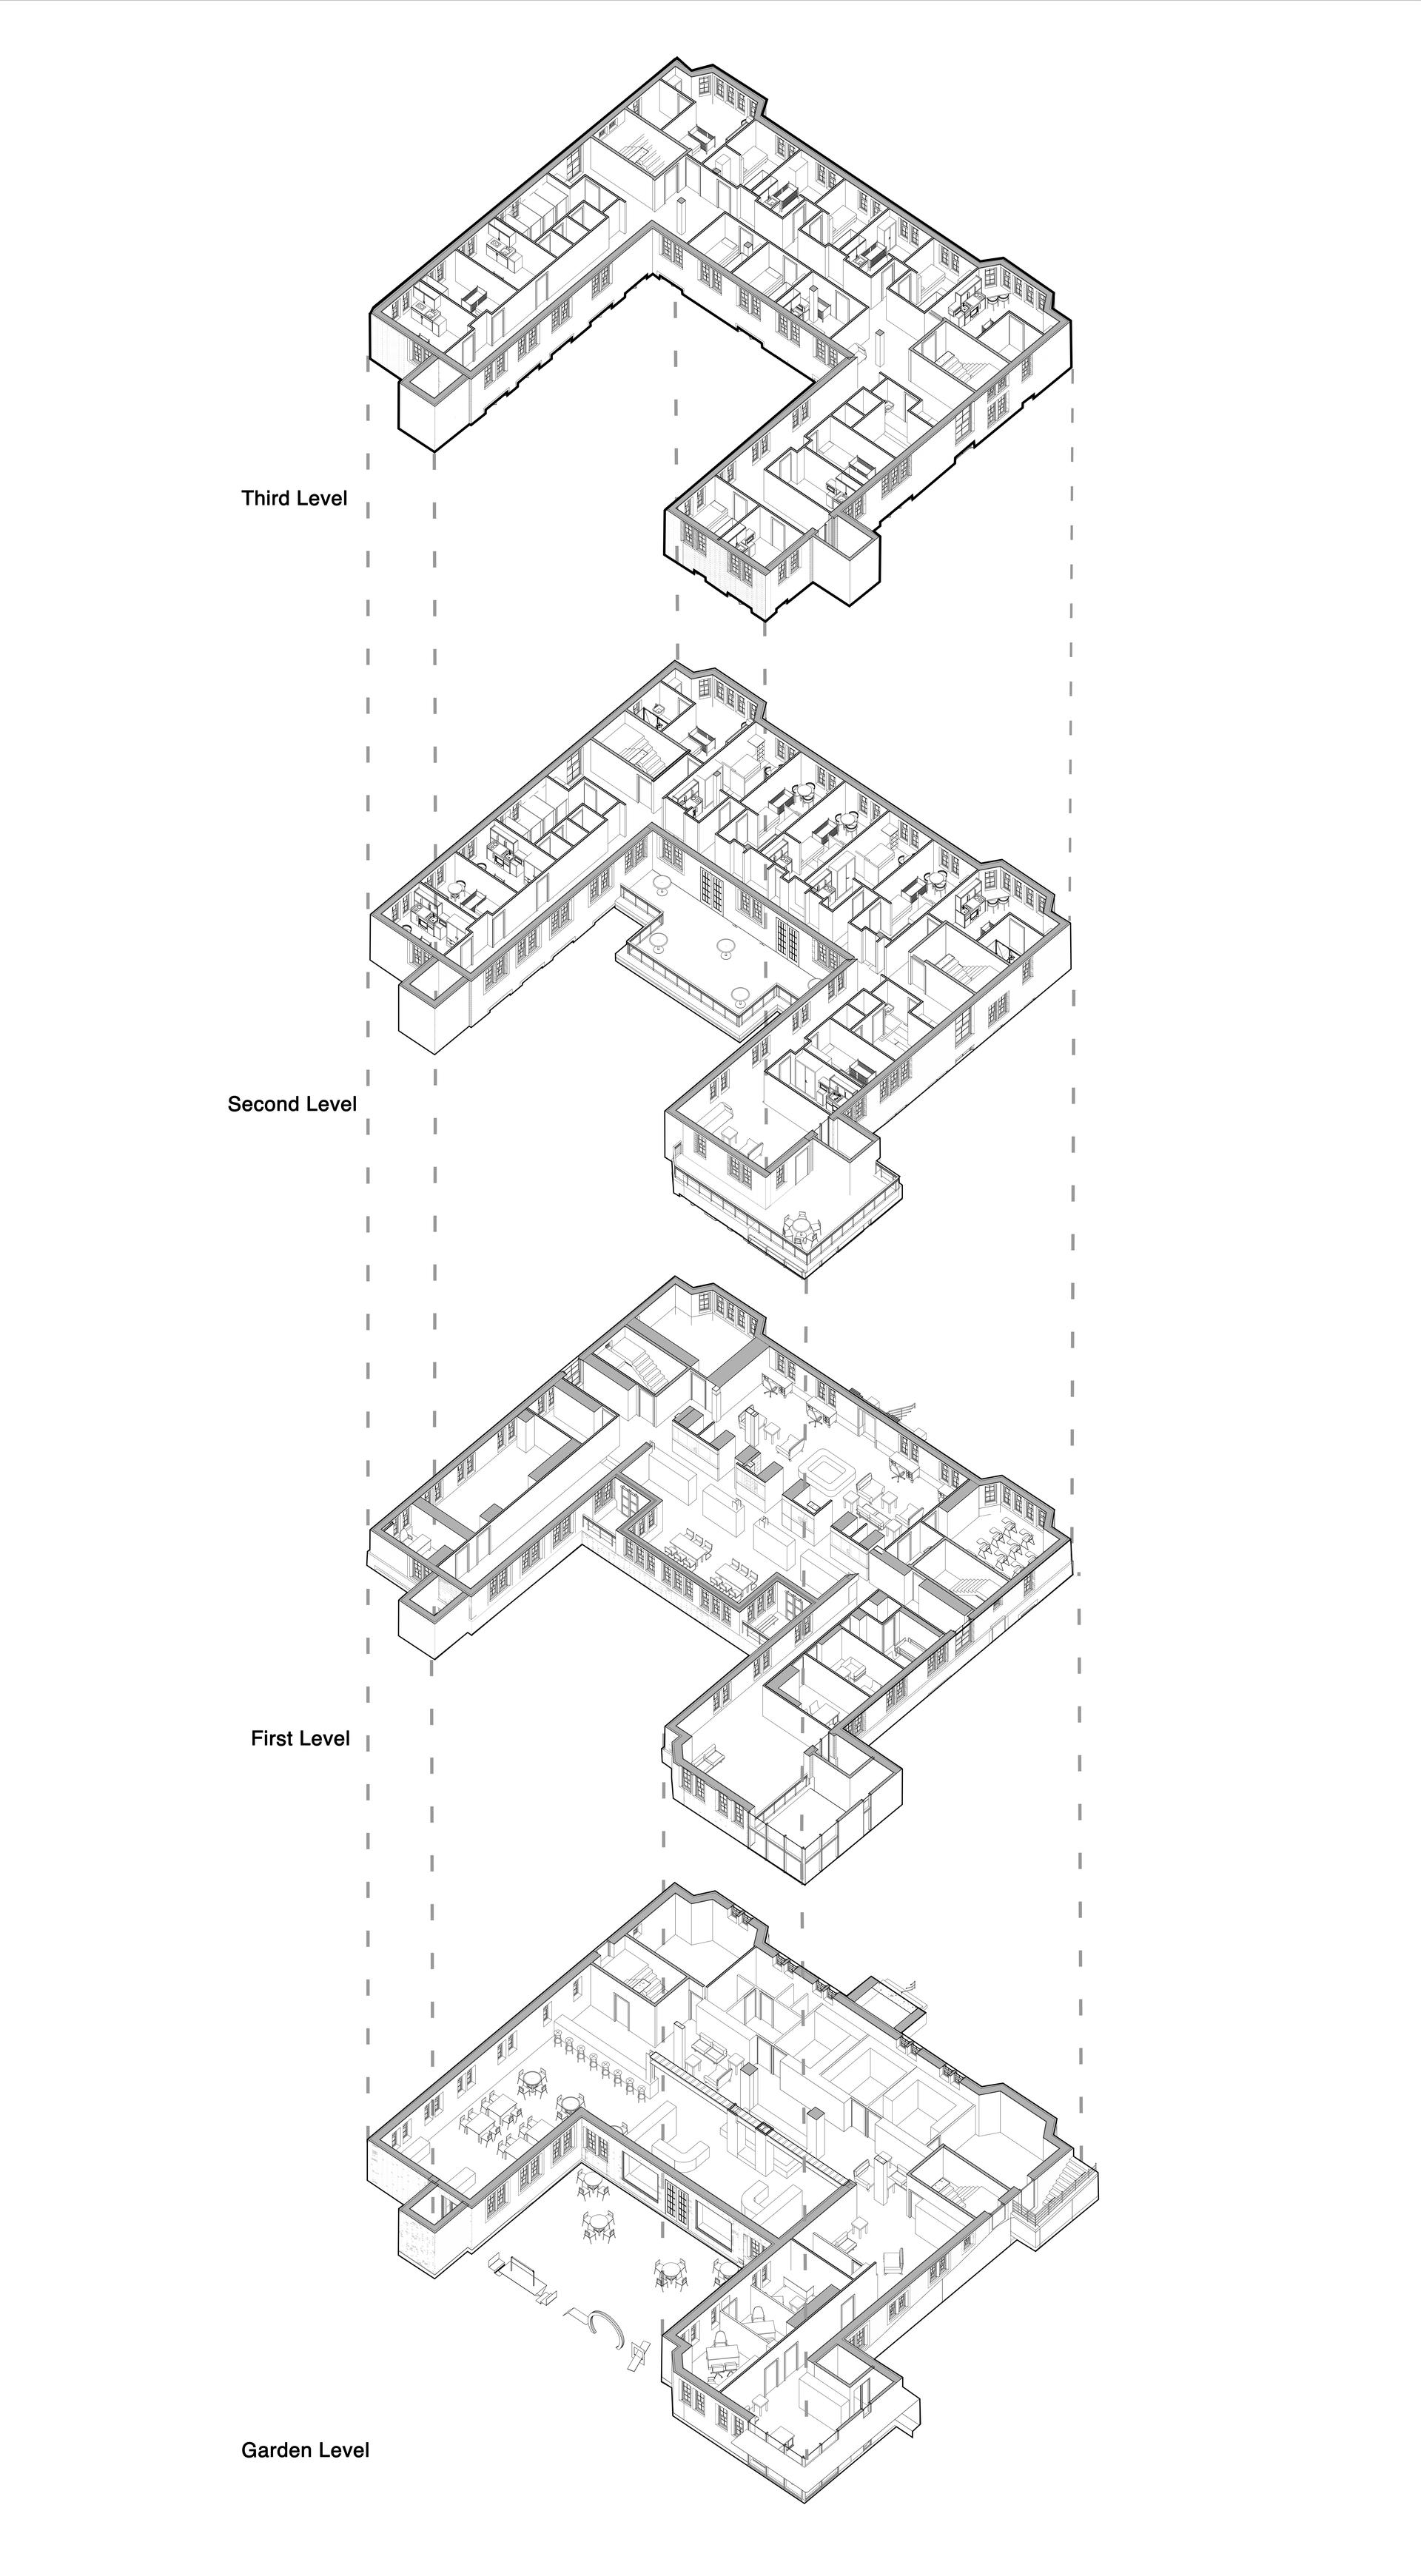 views showing spatial planning and accessibility of each floor 